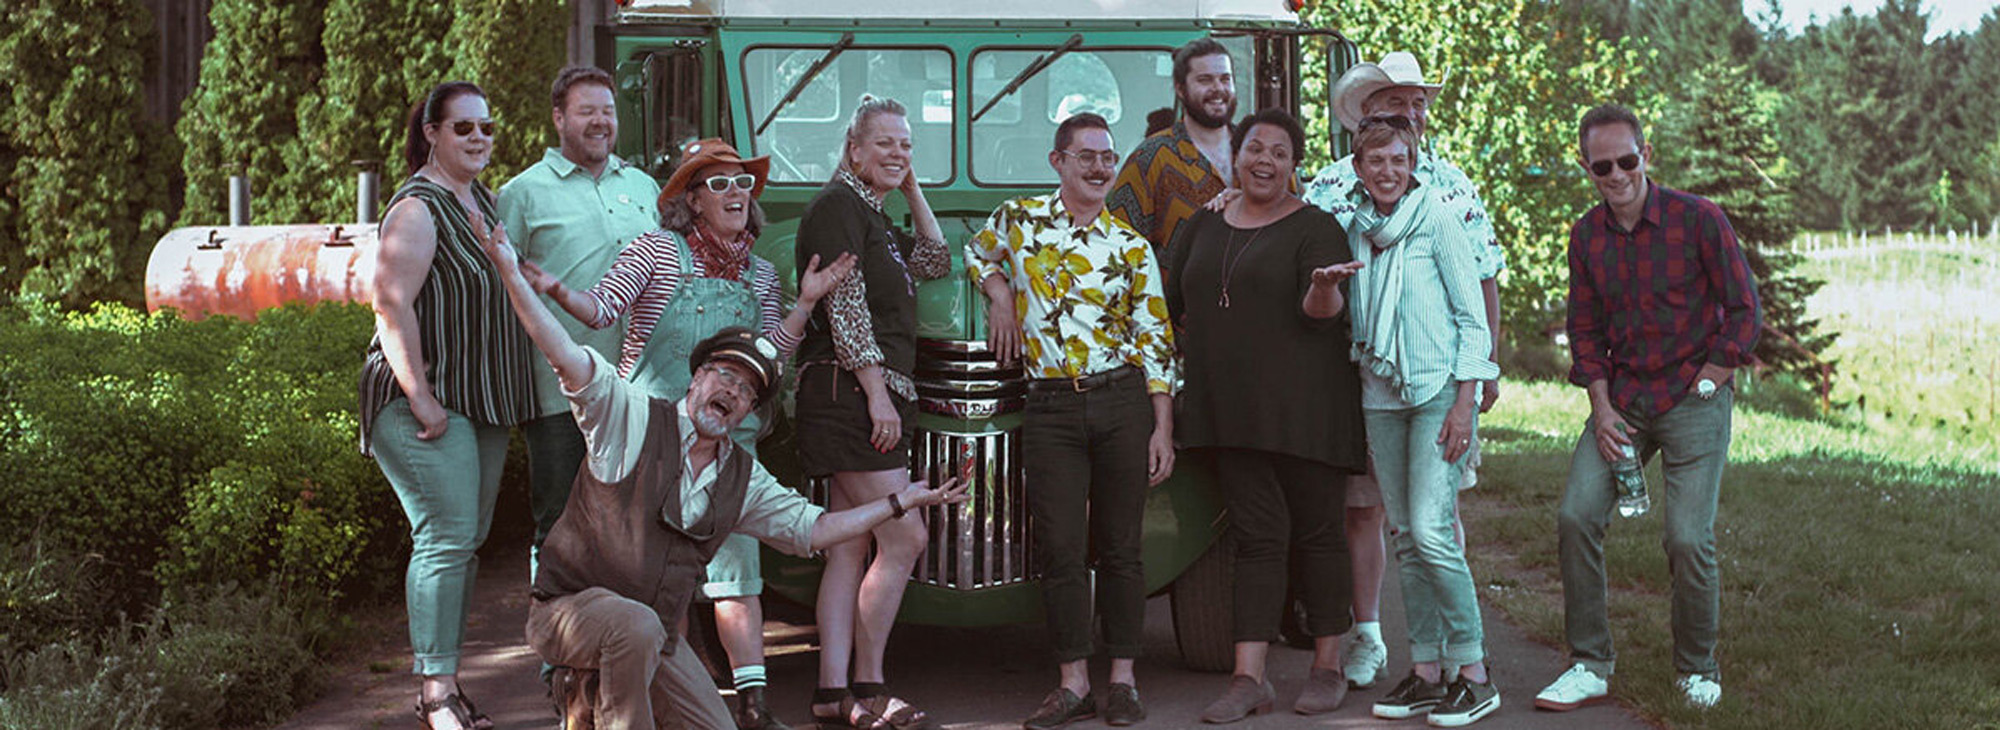 group of people pose in front of vintage bus